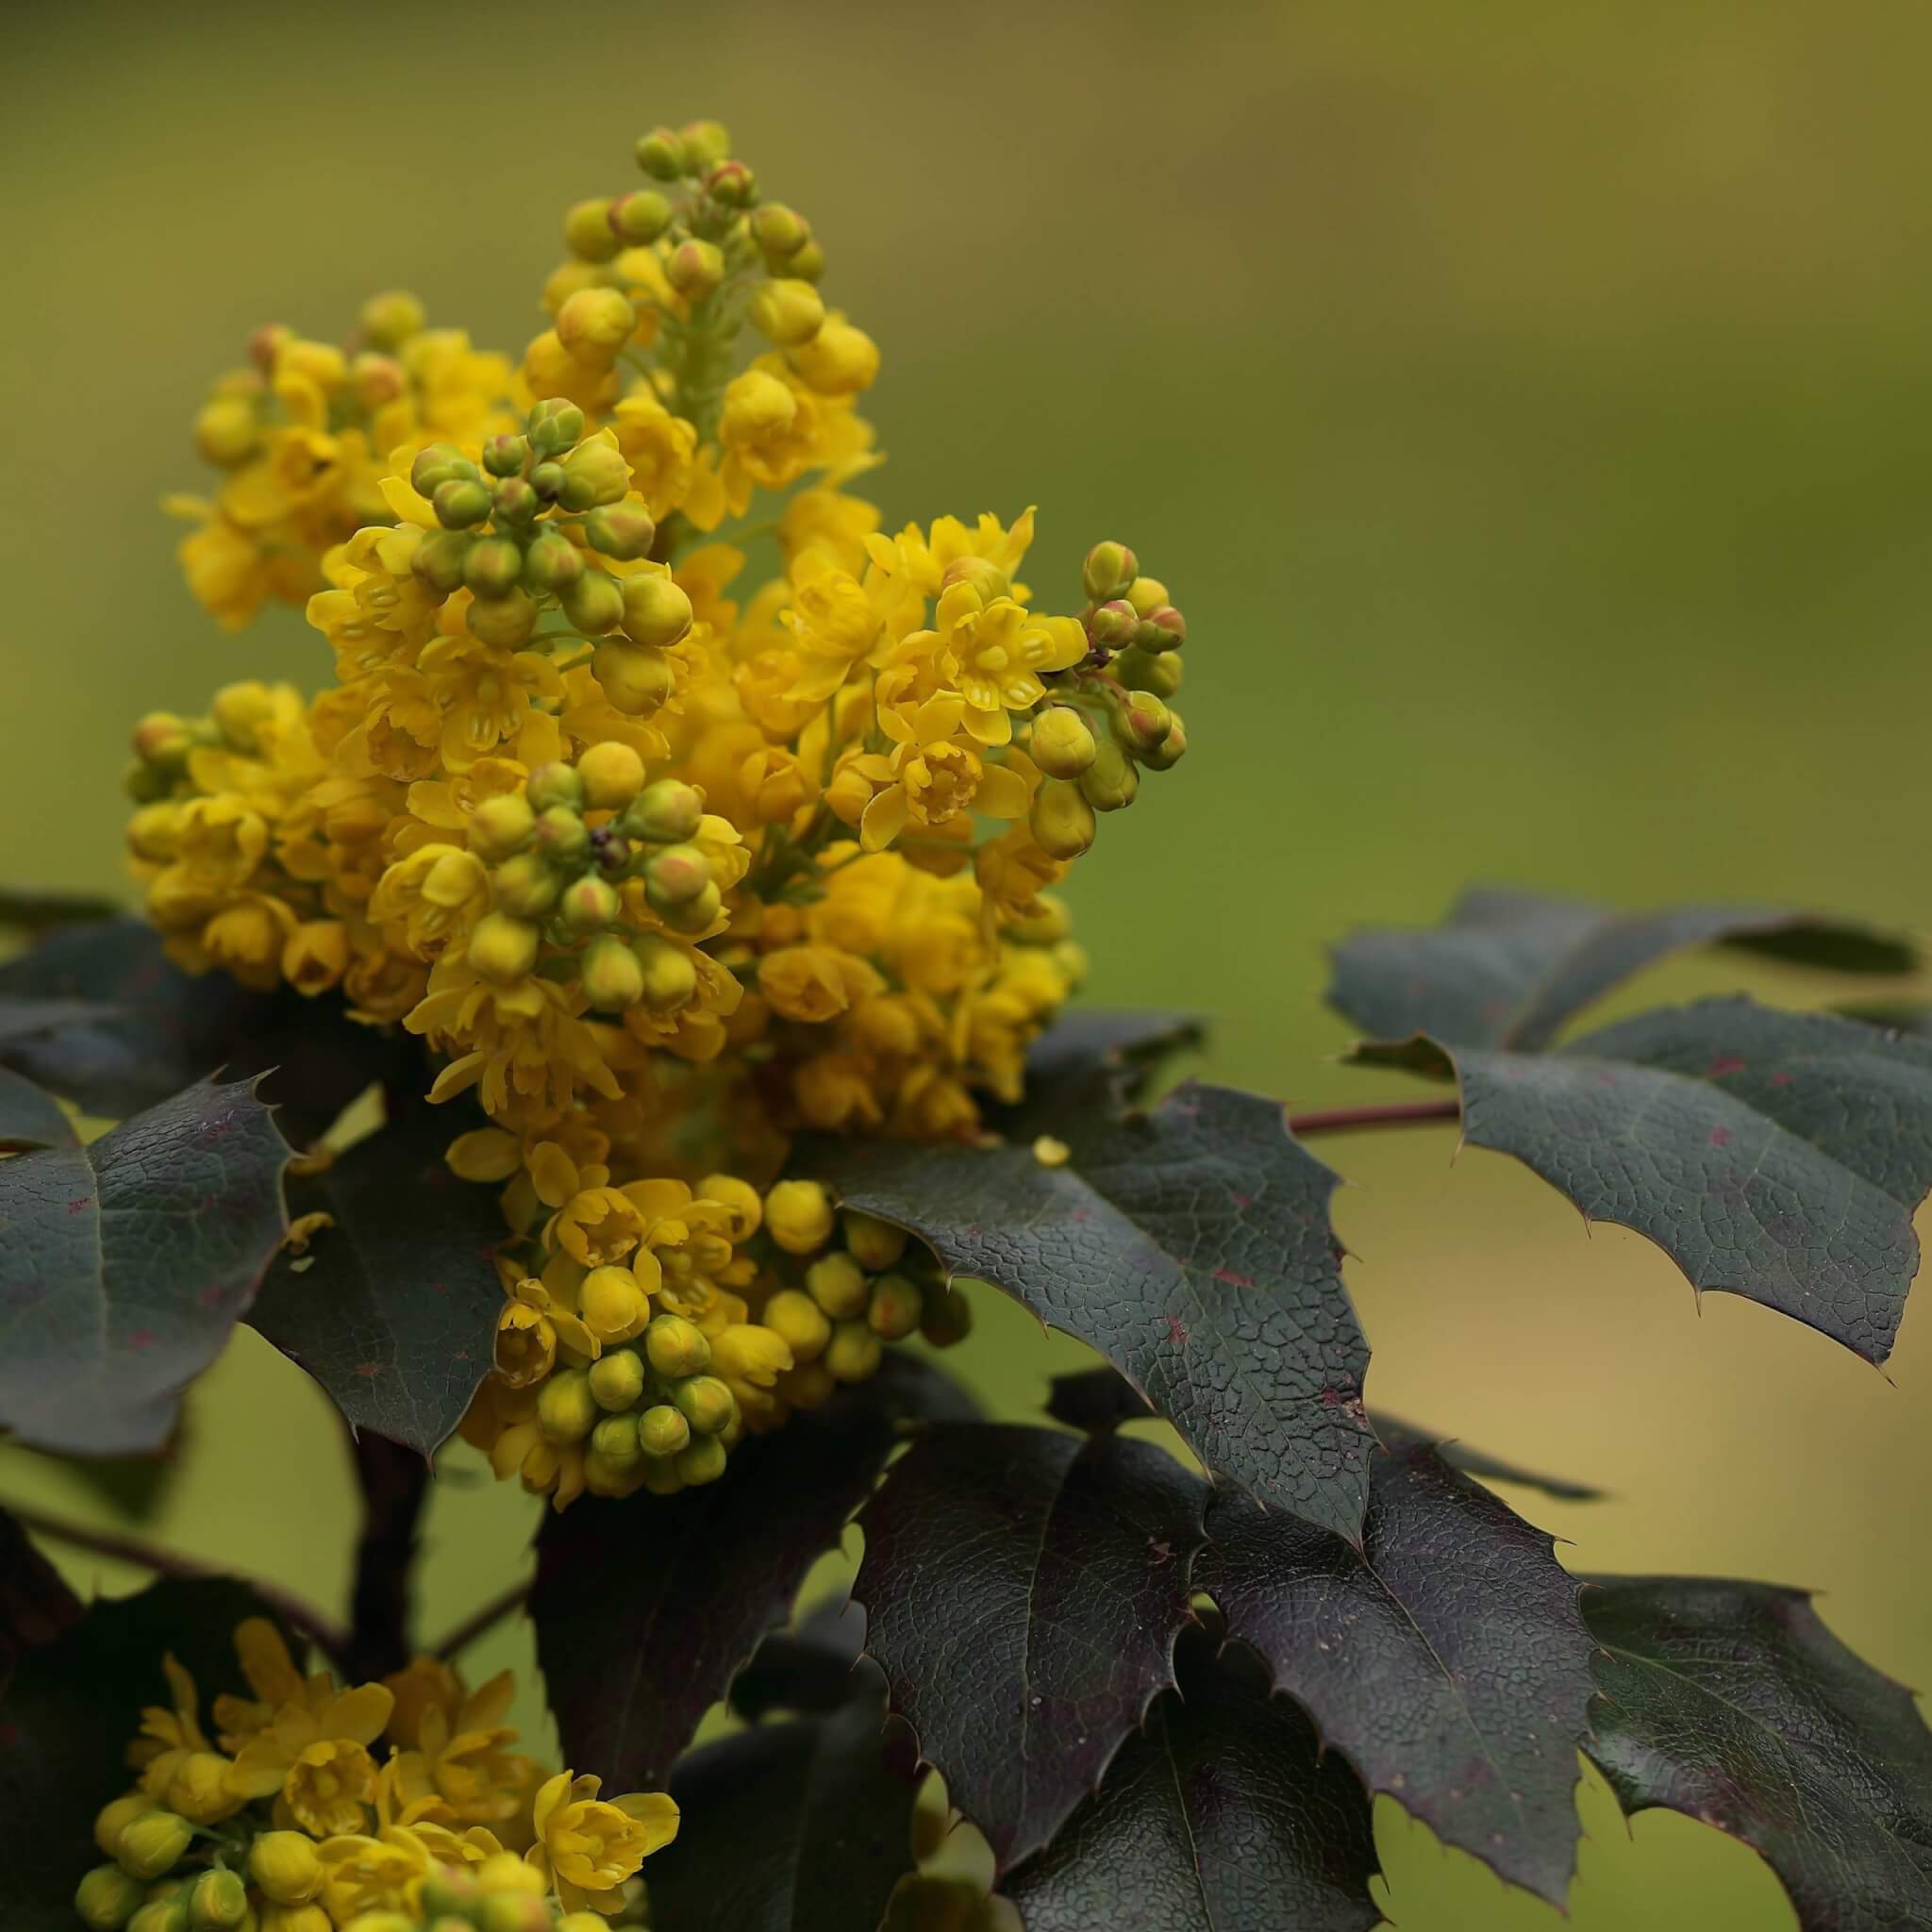 Mahonia Repens; Creeping Mahonia with blooming yellow flower clusters